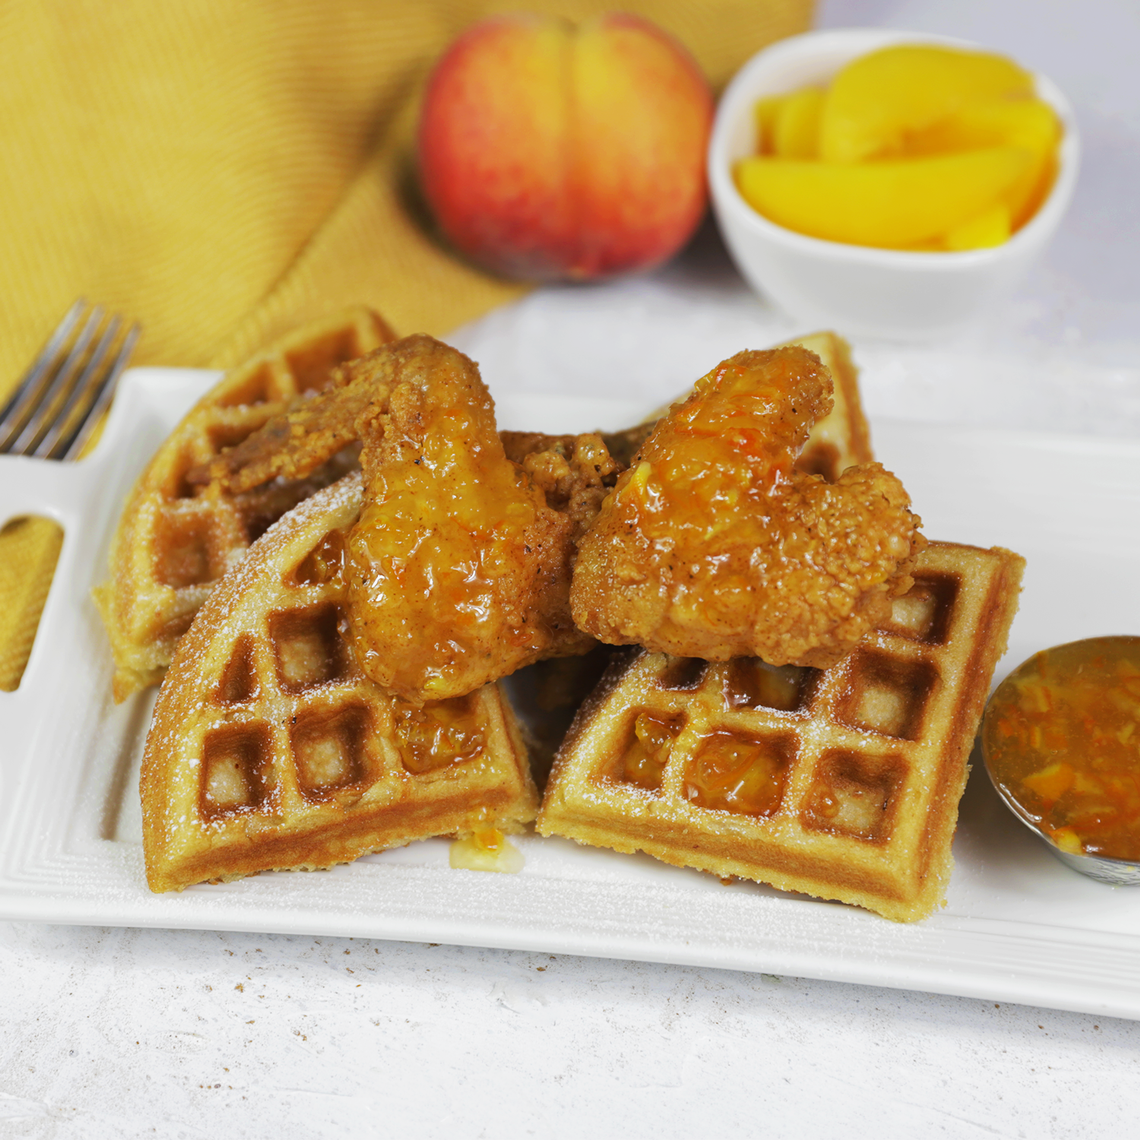 Chicken and Waffles with Peach Chutney from Josanne’s. Provided